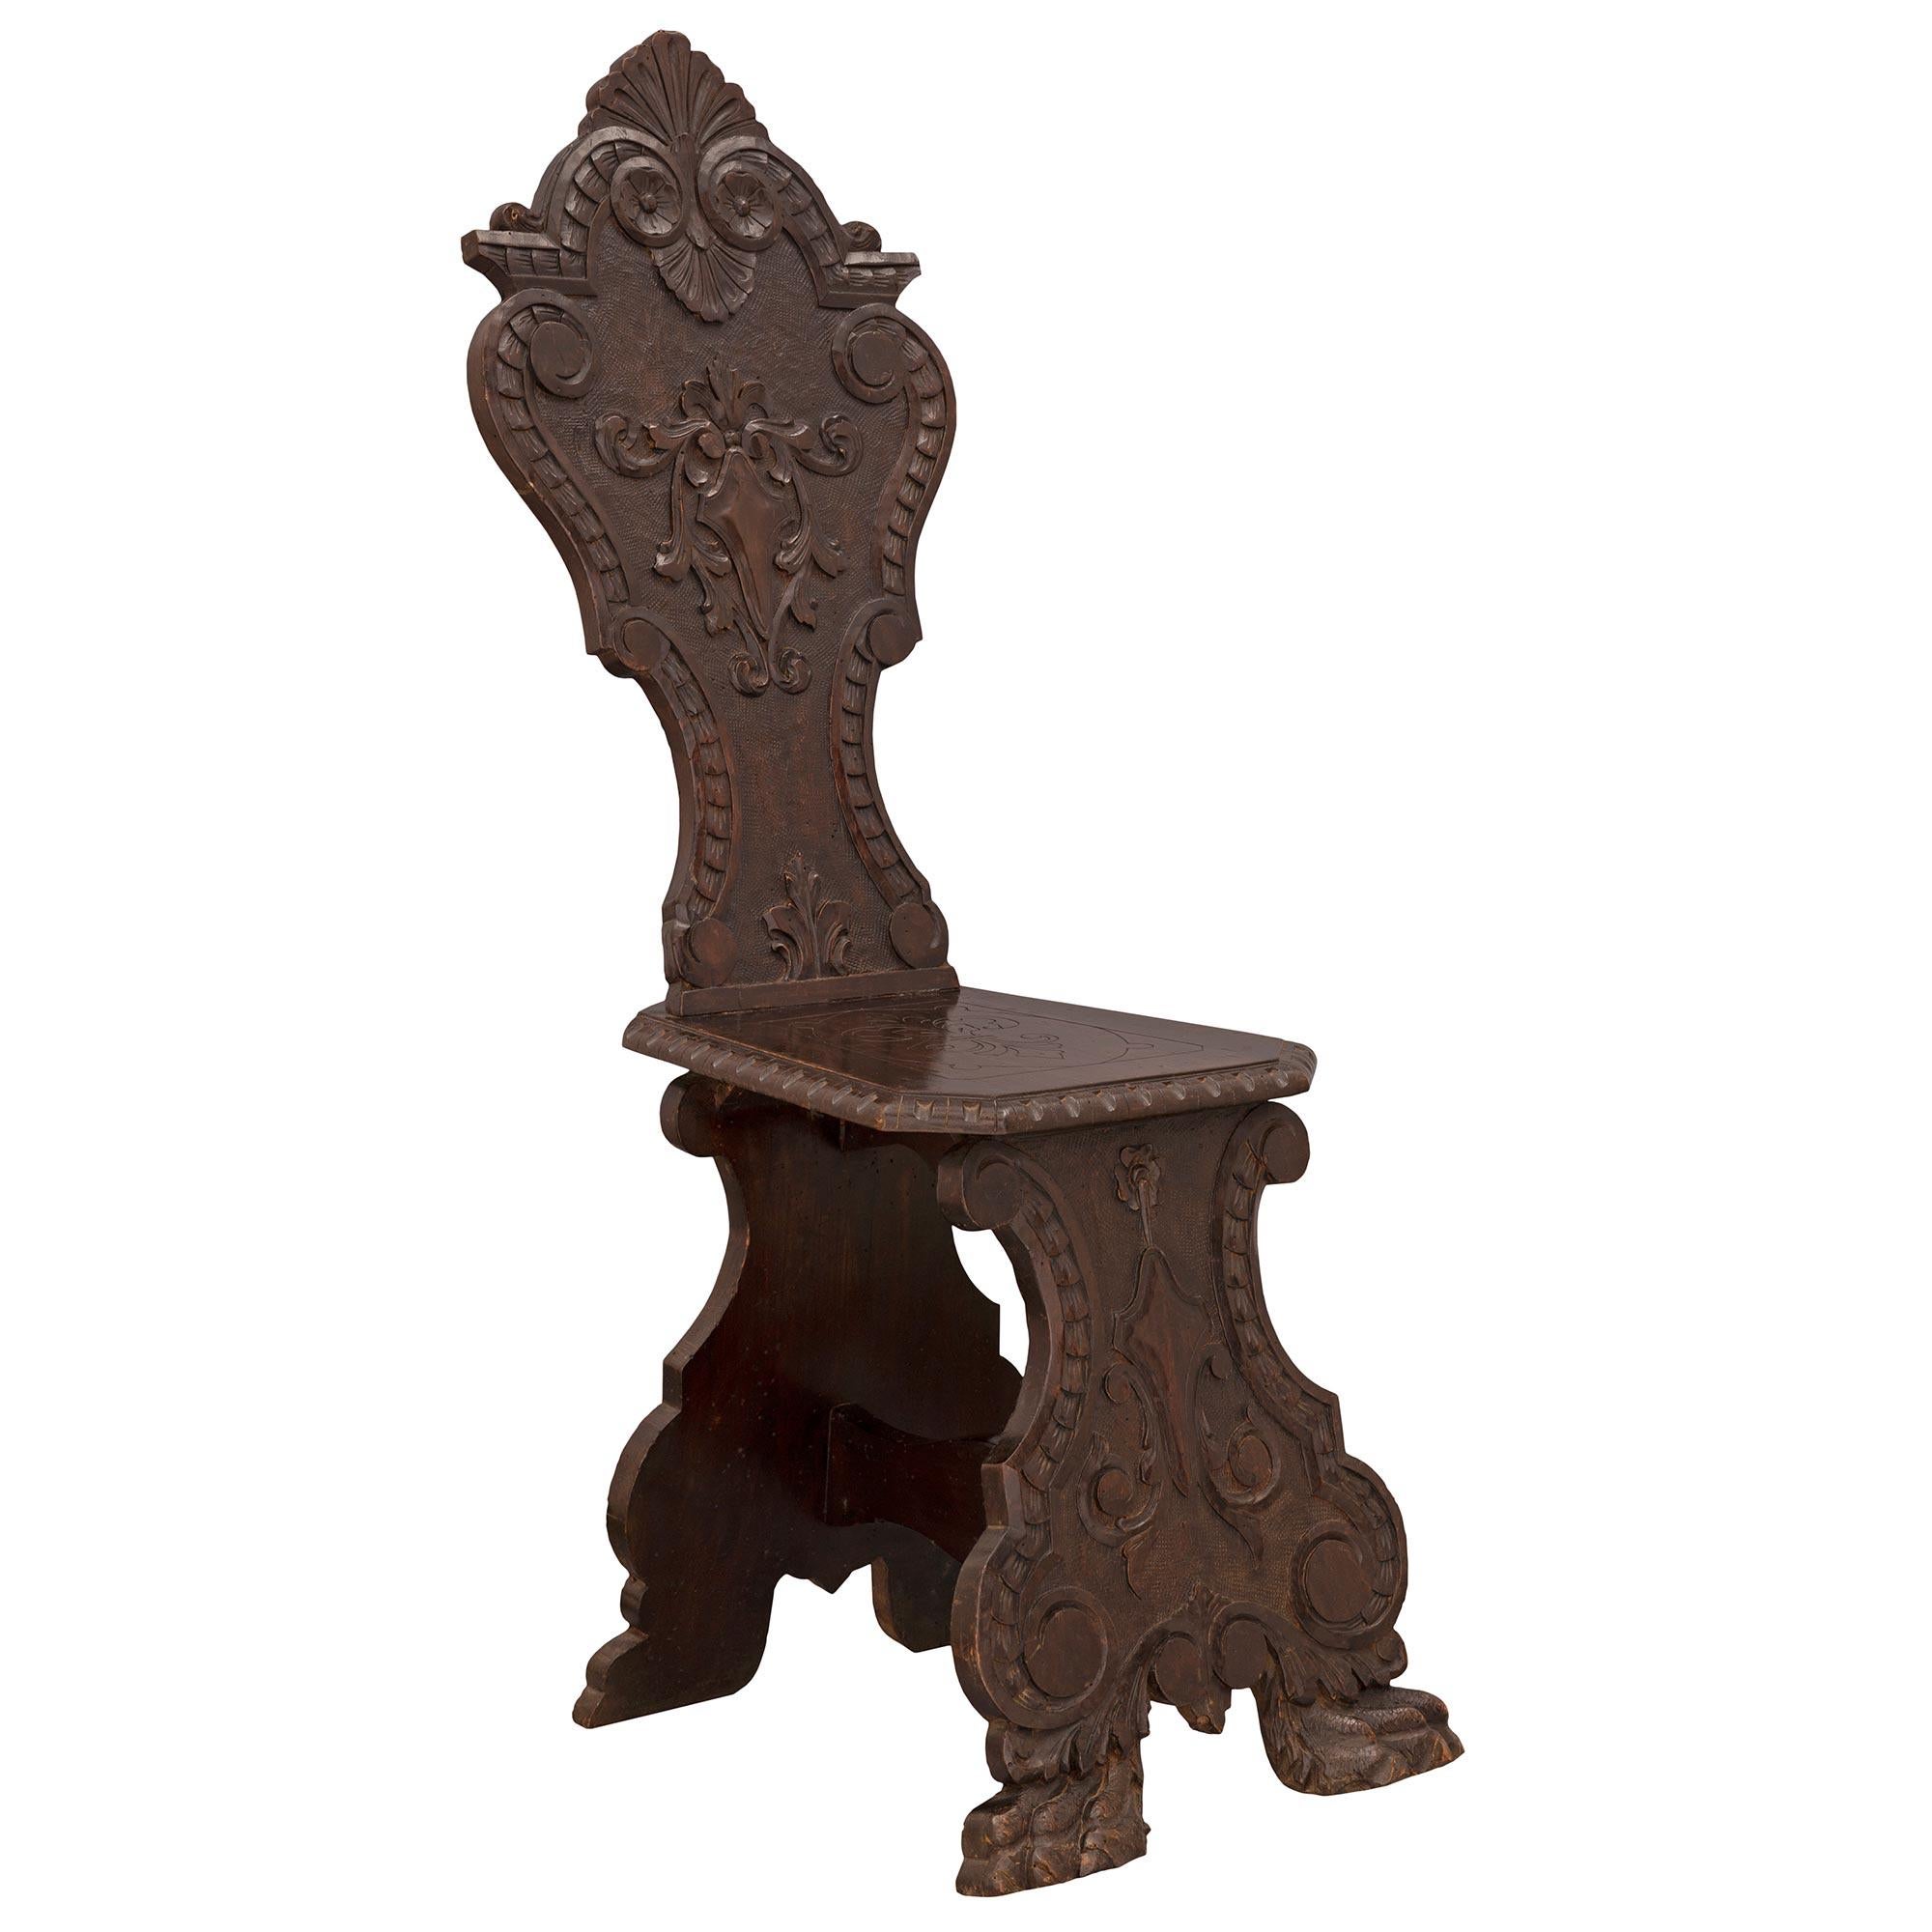 A handsome and most decorative pair of Italian 19th century Renaissance st. walnut chairs. Each chair is raised by richly carved paw feet below the elegantly scrolled supports decorated with beautiful foliate designs set on most decorative carved